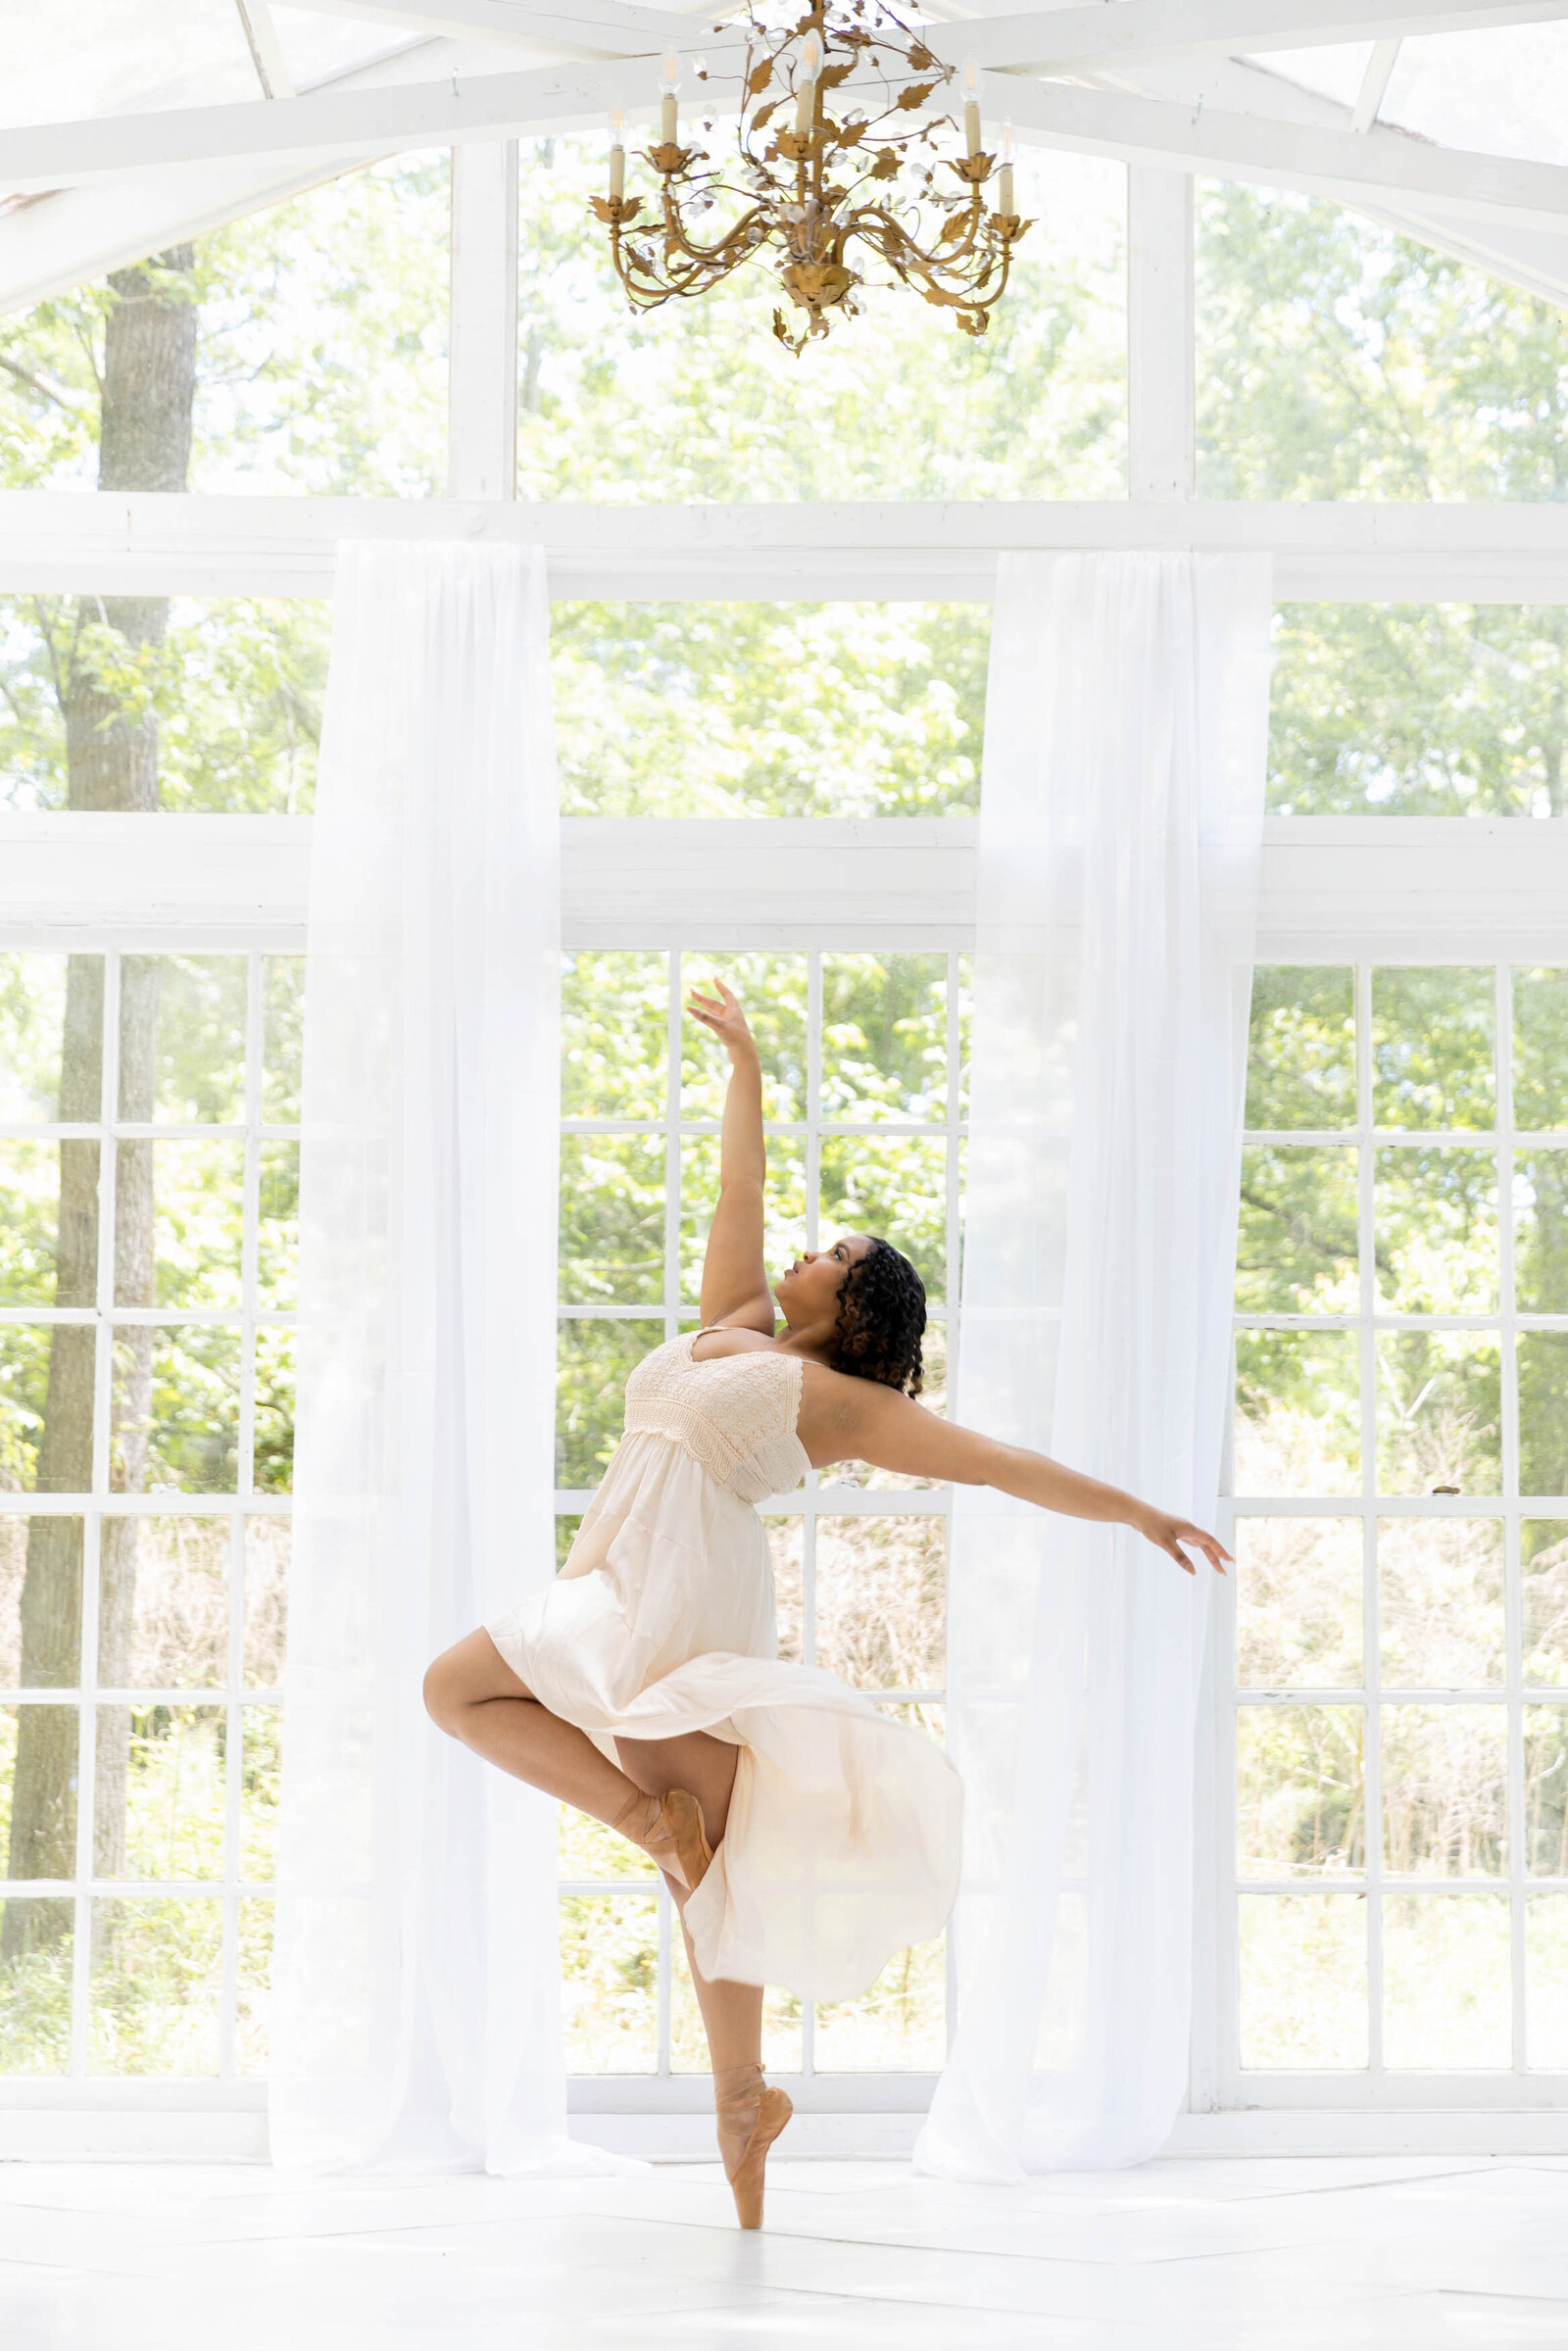 Black ballerina in white dress and brown pointe shoes dancing in glass greenhouse under a brass chandelier